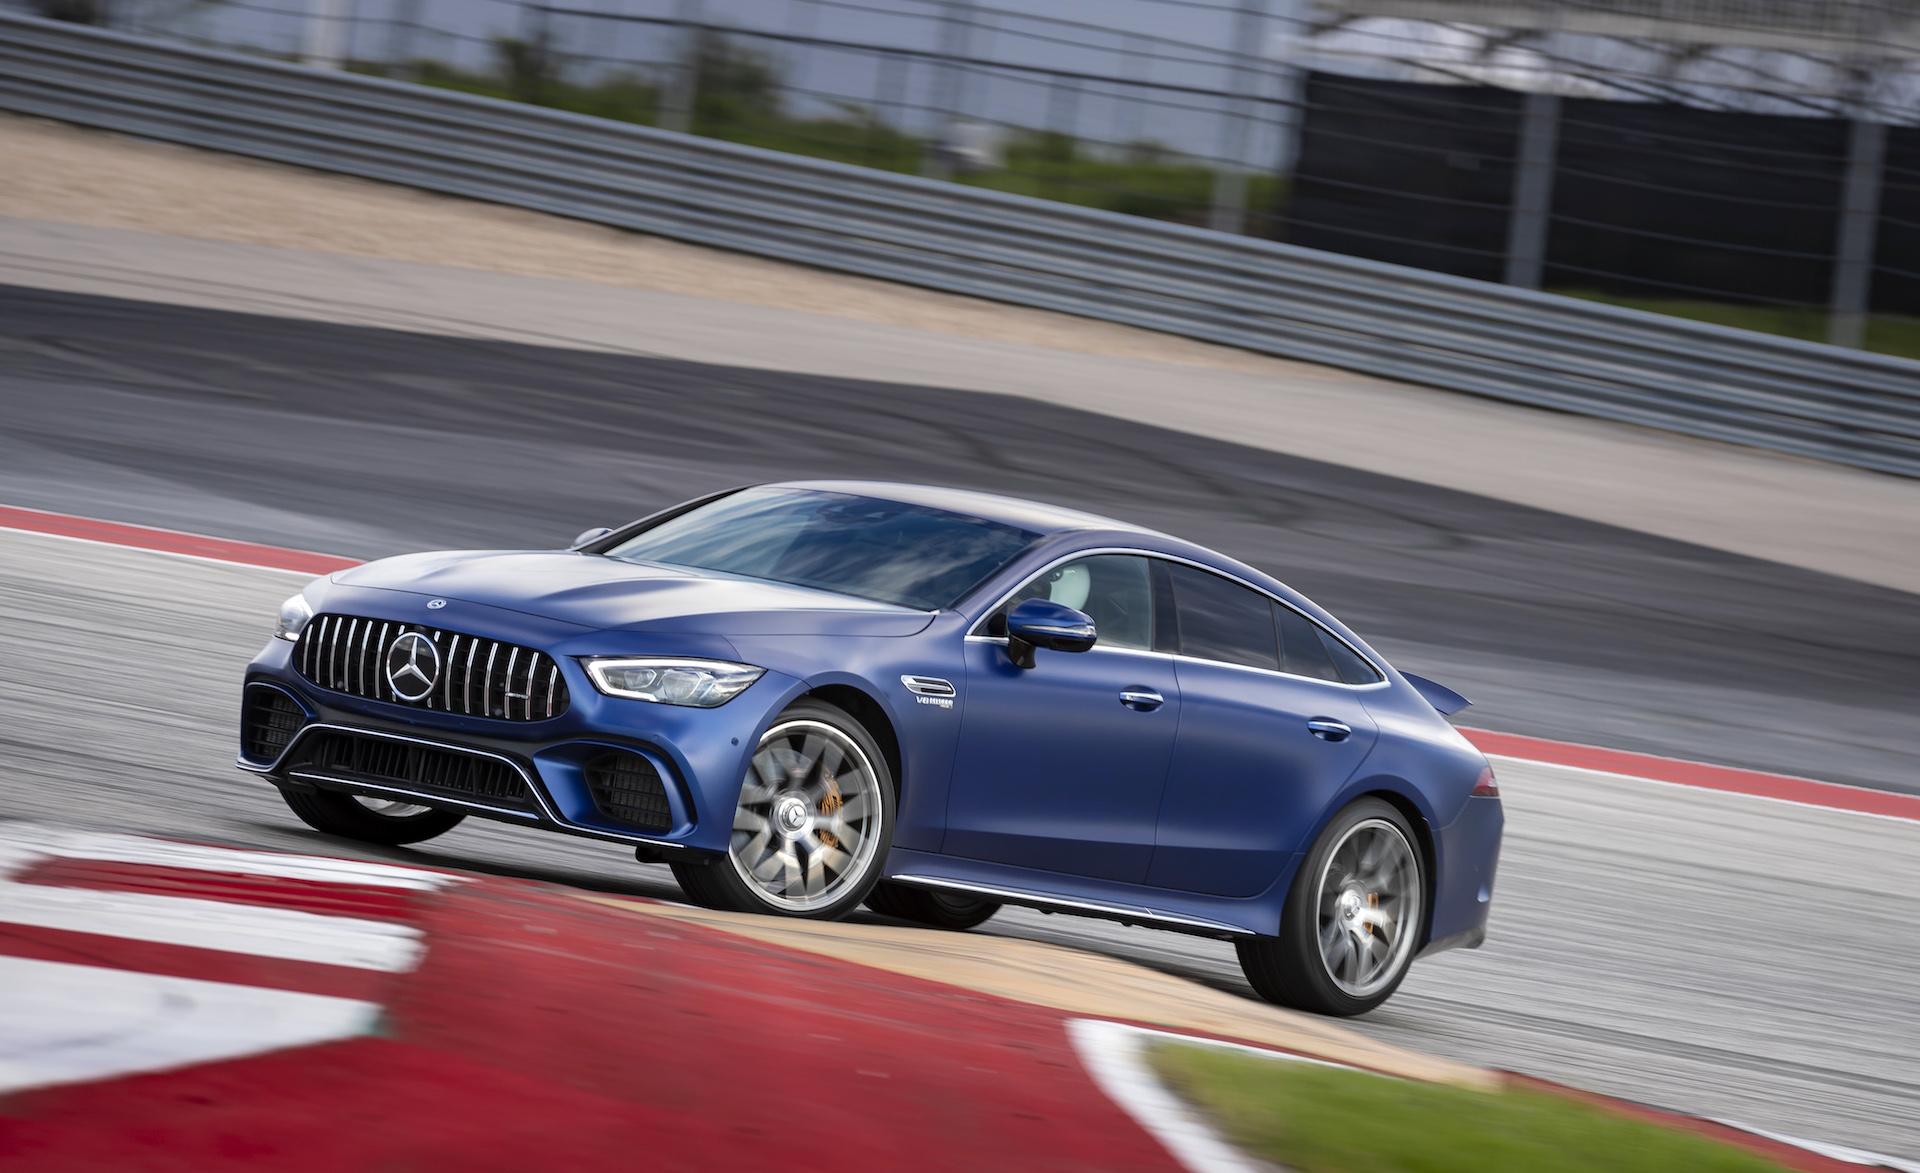 Mercedes AMG GT 63 S 4 Door Coupe First Drive Review: The New